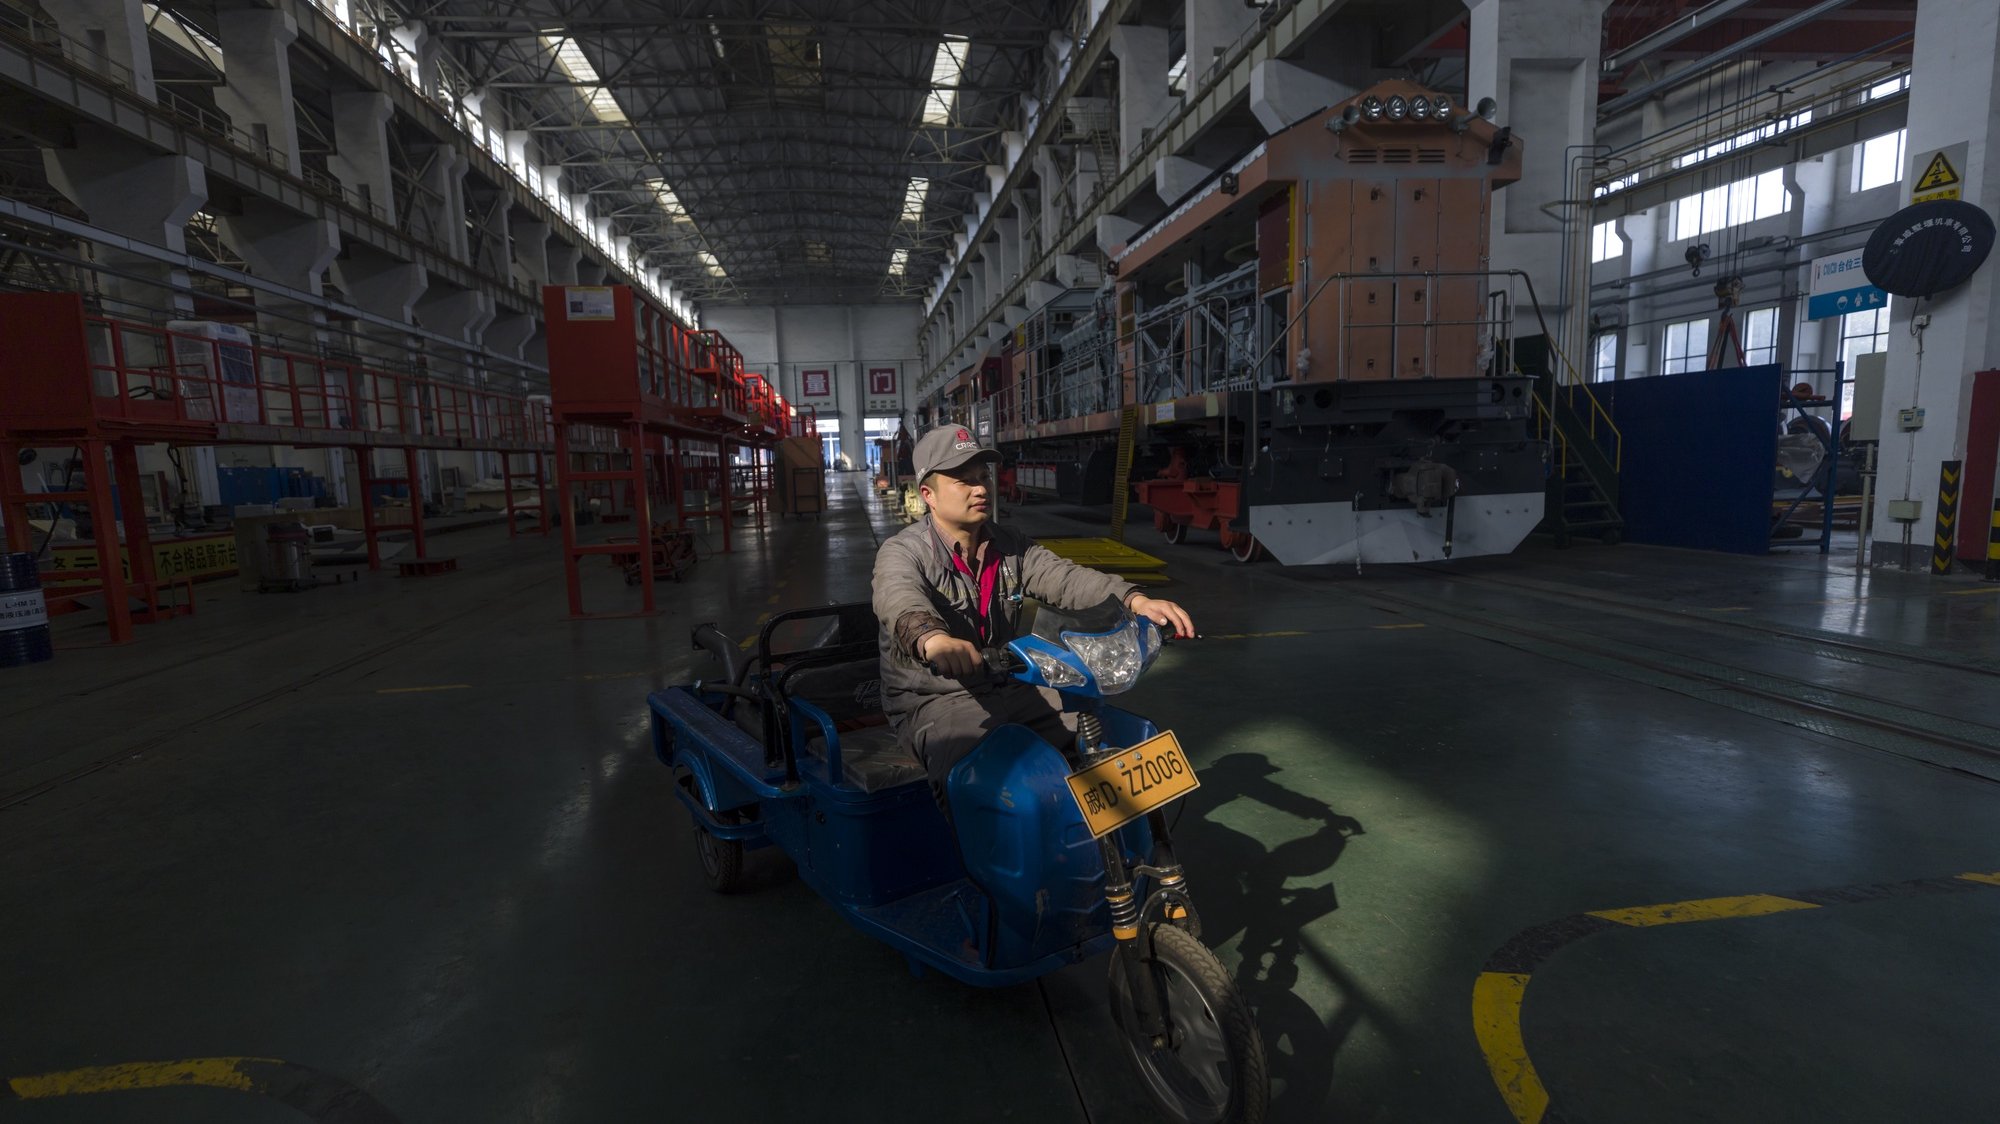 epa09627032 A worker drives parts in a motorcycle in a CRRC Qishuyan Institute locomotives factory, during the organised media tour in Changzhou, Jiangsu province, China, 07 December 2021. CRRC Qishuyan Institute Co., Ltd. is located in Changzhou Economic Development Zone, Jiangsu, in the middle section of Shanghai-Nanjing Railway. It is an important R&amp;D, manufacturing and maintenance base for railway passenger and freight diesel locomotives in the country. It exports to more than 20 countries and regions including Australia, Argentina, Venezuela, Kenya, Thailand, and Cambodia.  EPA/ALEX PLAVEVSKI